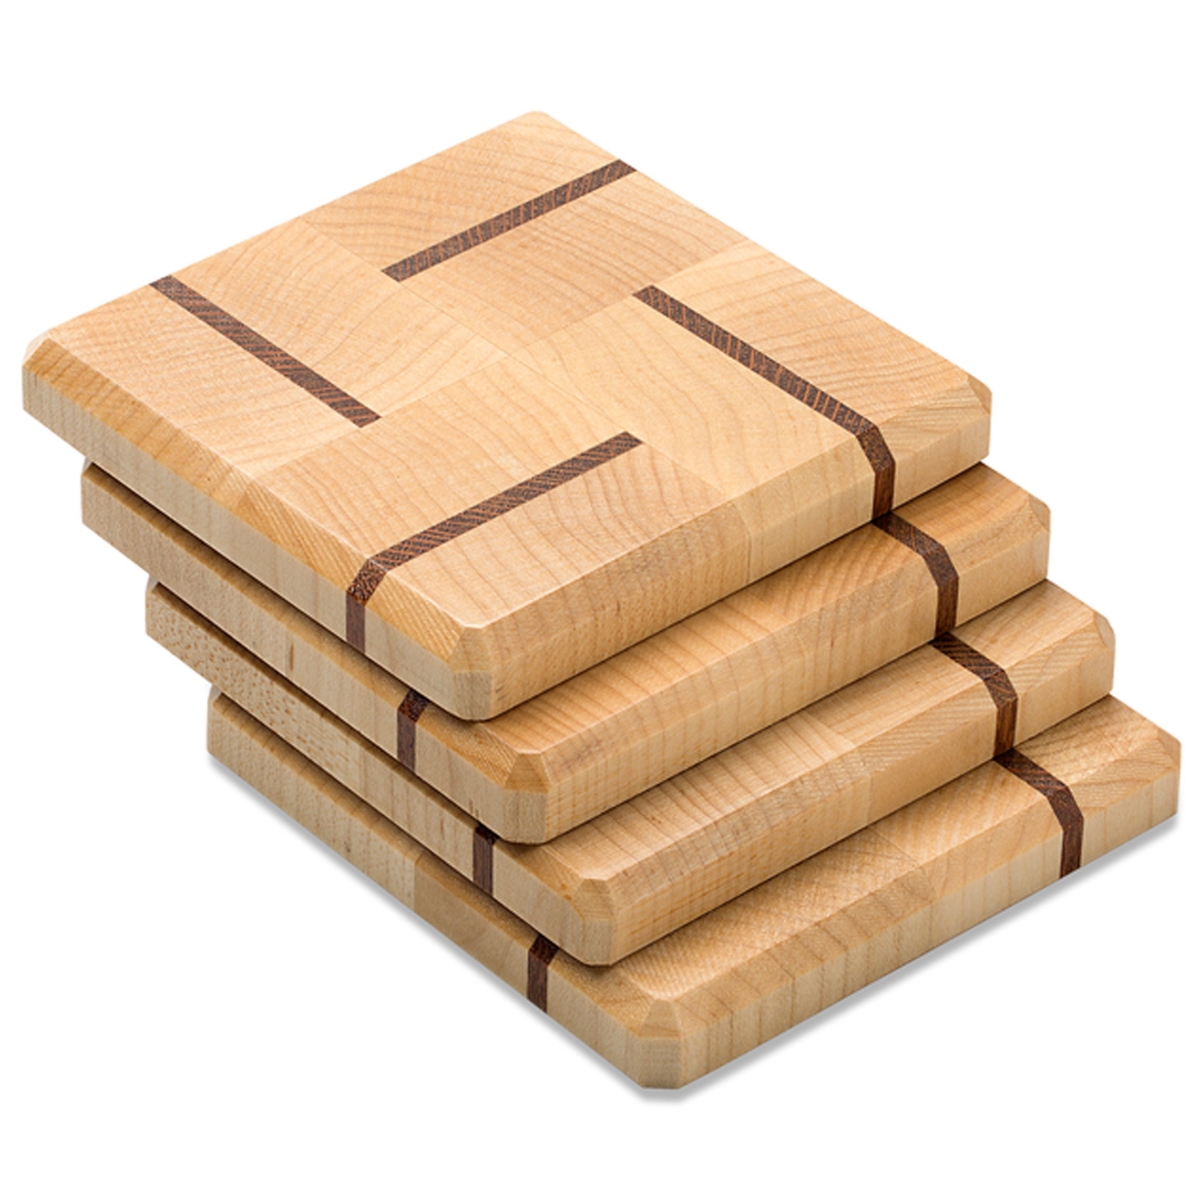 Picture of A & E Millwork AEM-5011 Maple & Lace Wood Coasters End Grain - Set of 4